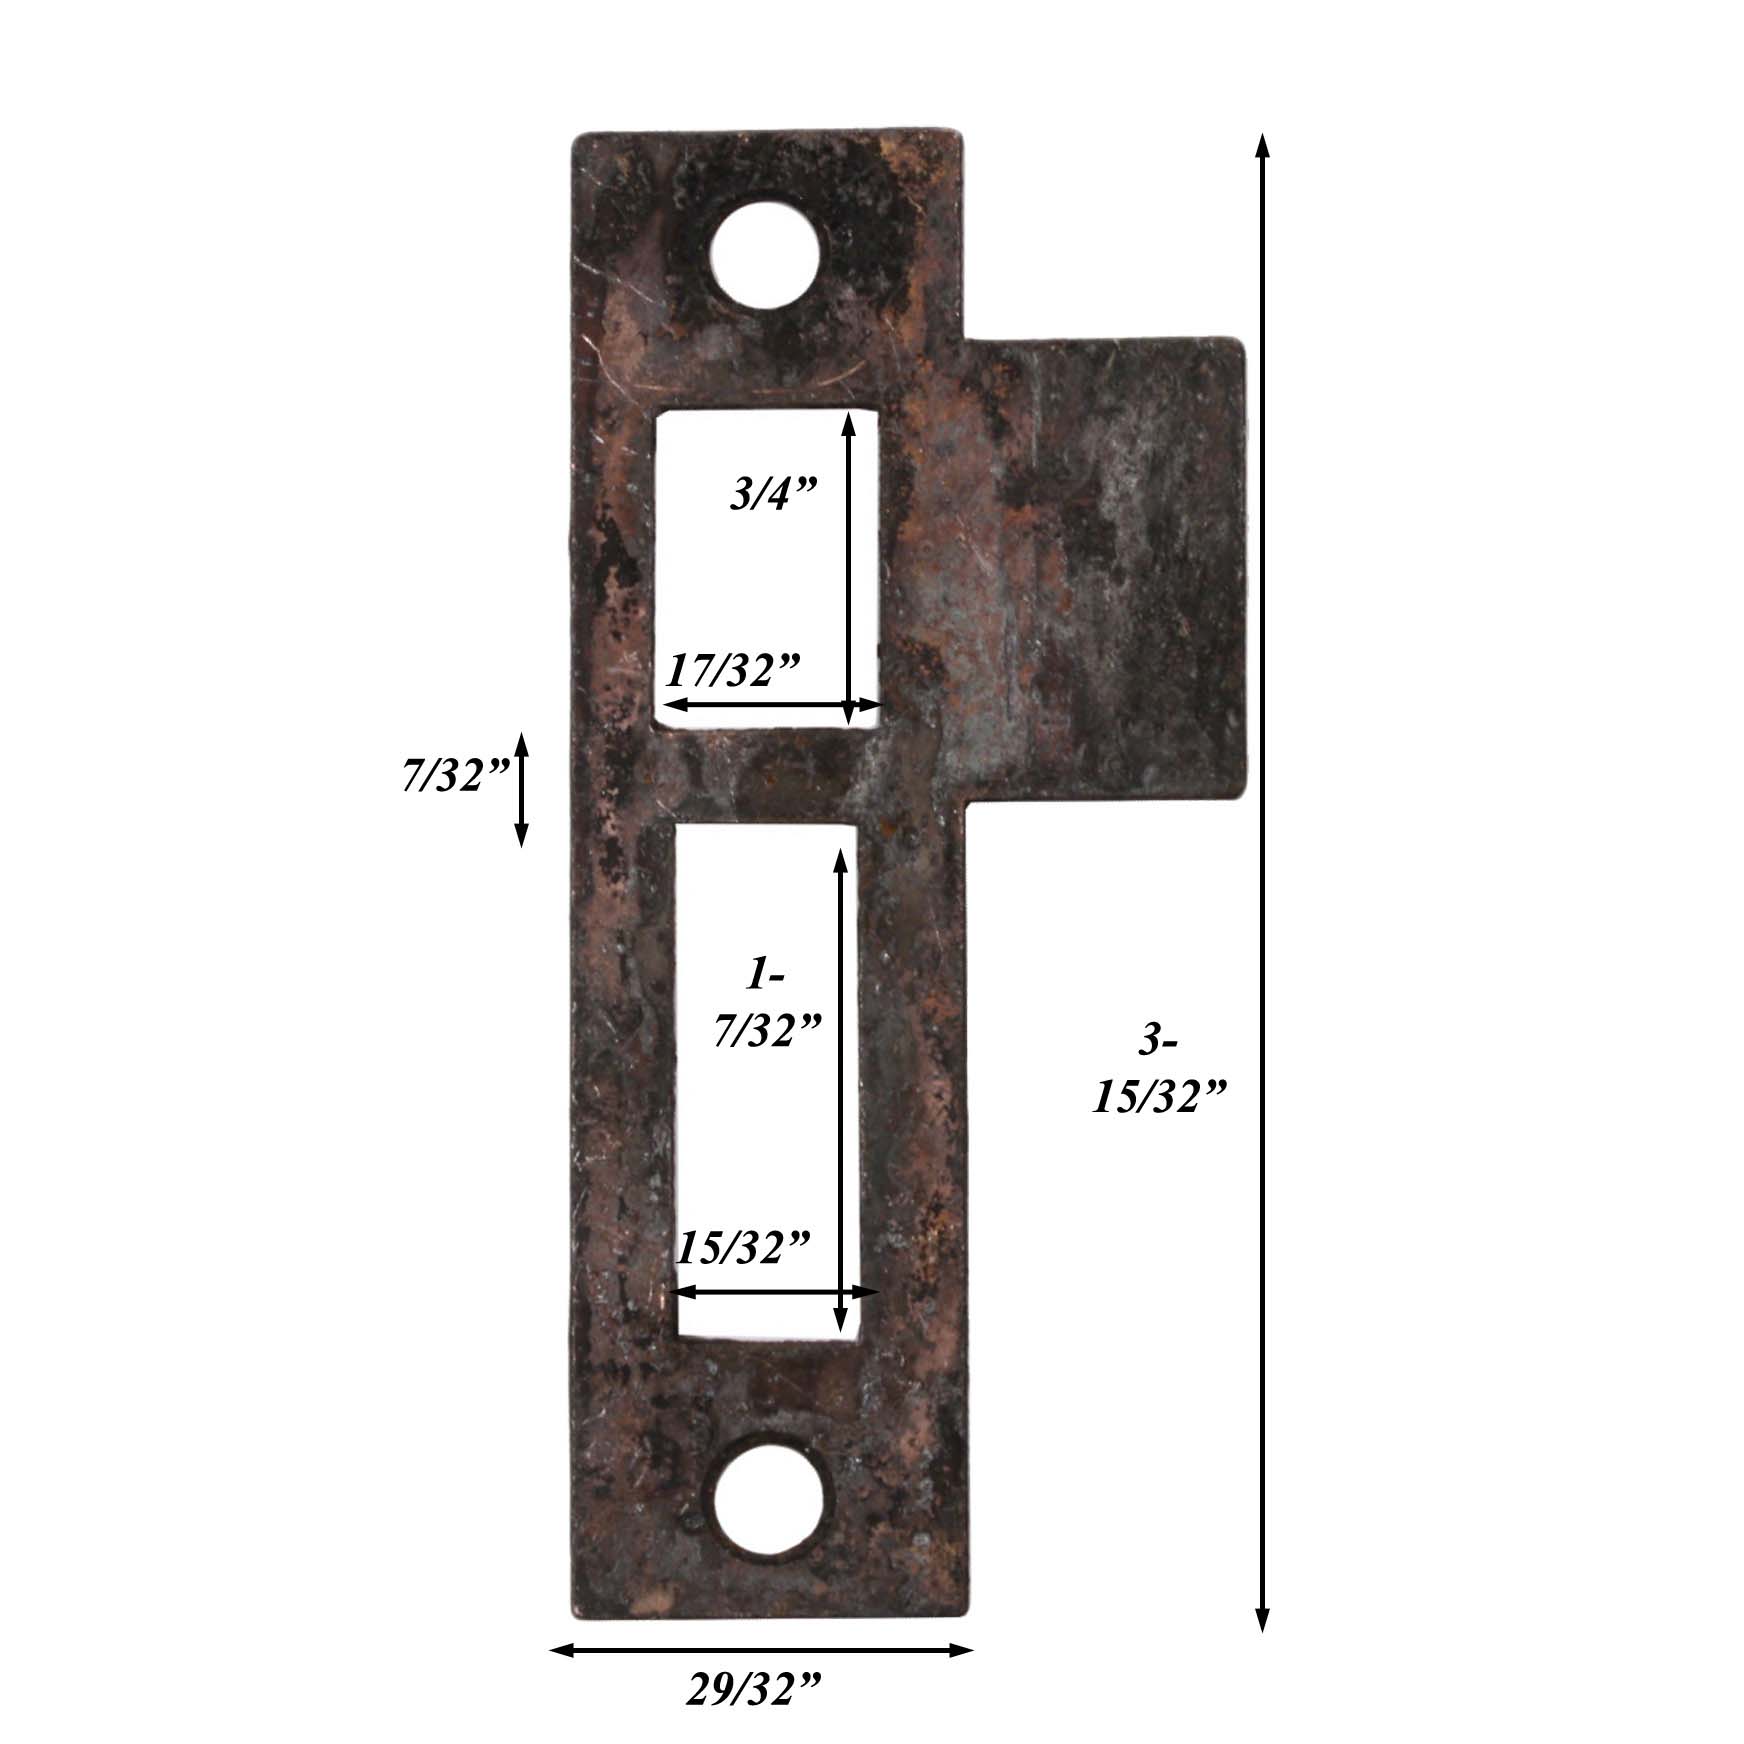 SOLD Antique Salvaged Strike Plates for Mortise Locks, 7/32” Spacing-41460